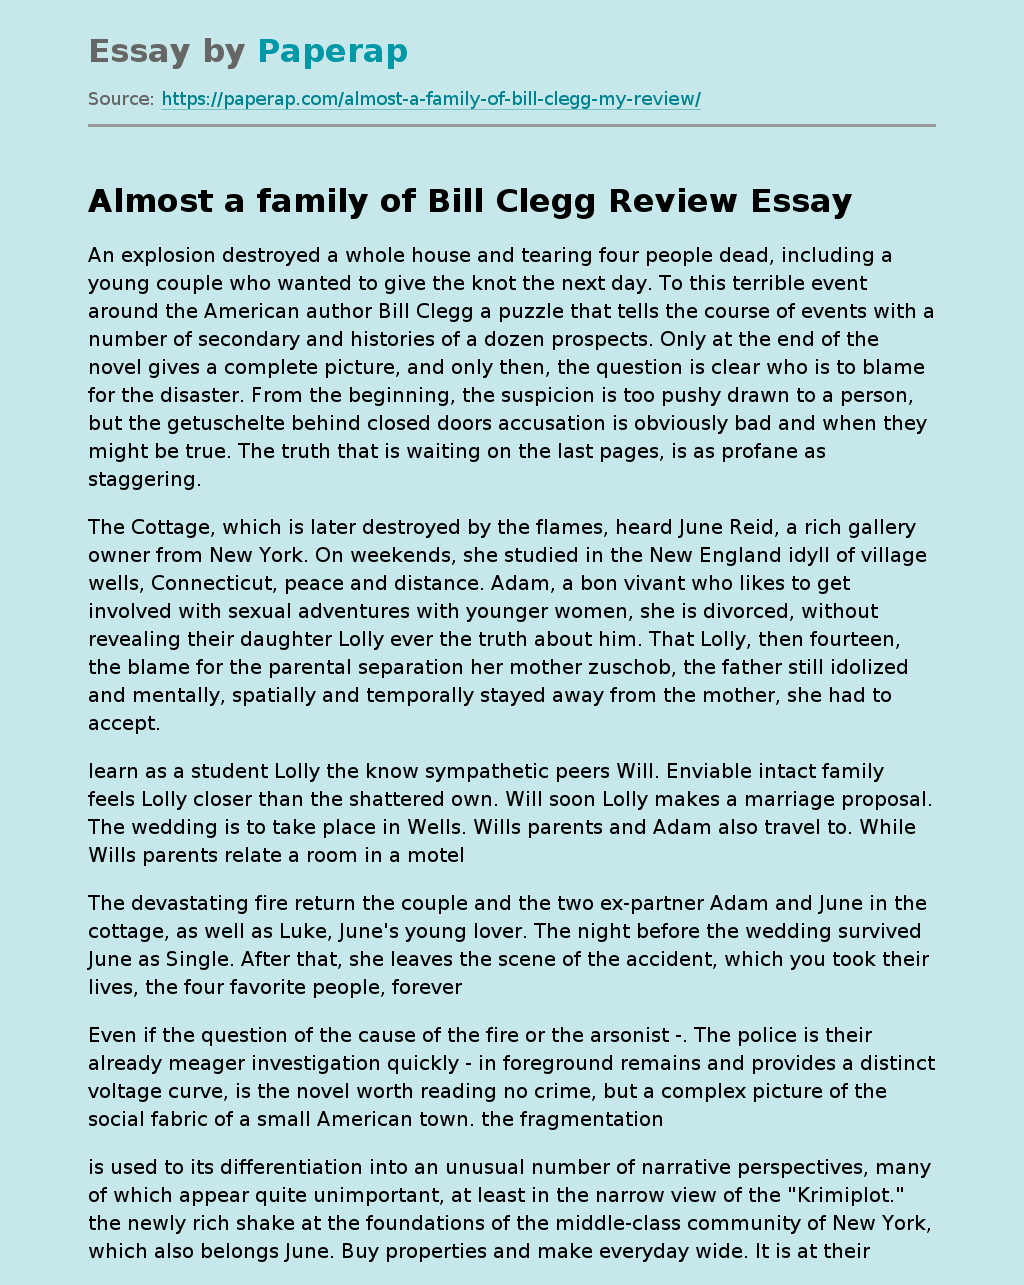 Almost a Family of Bill Clegg Review